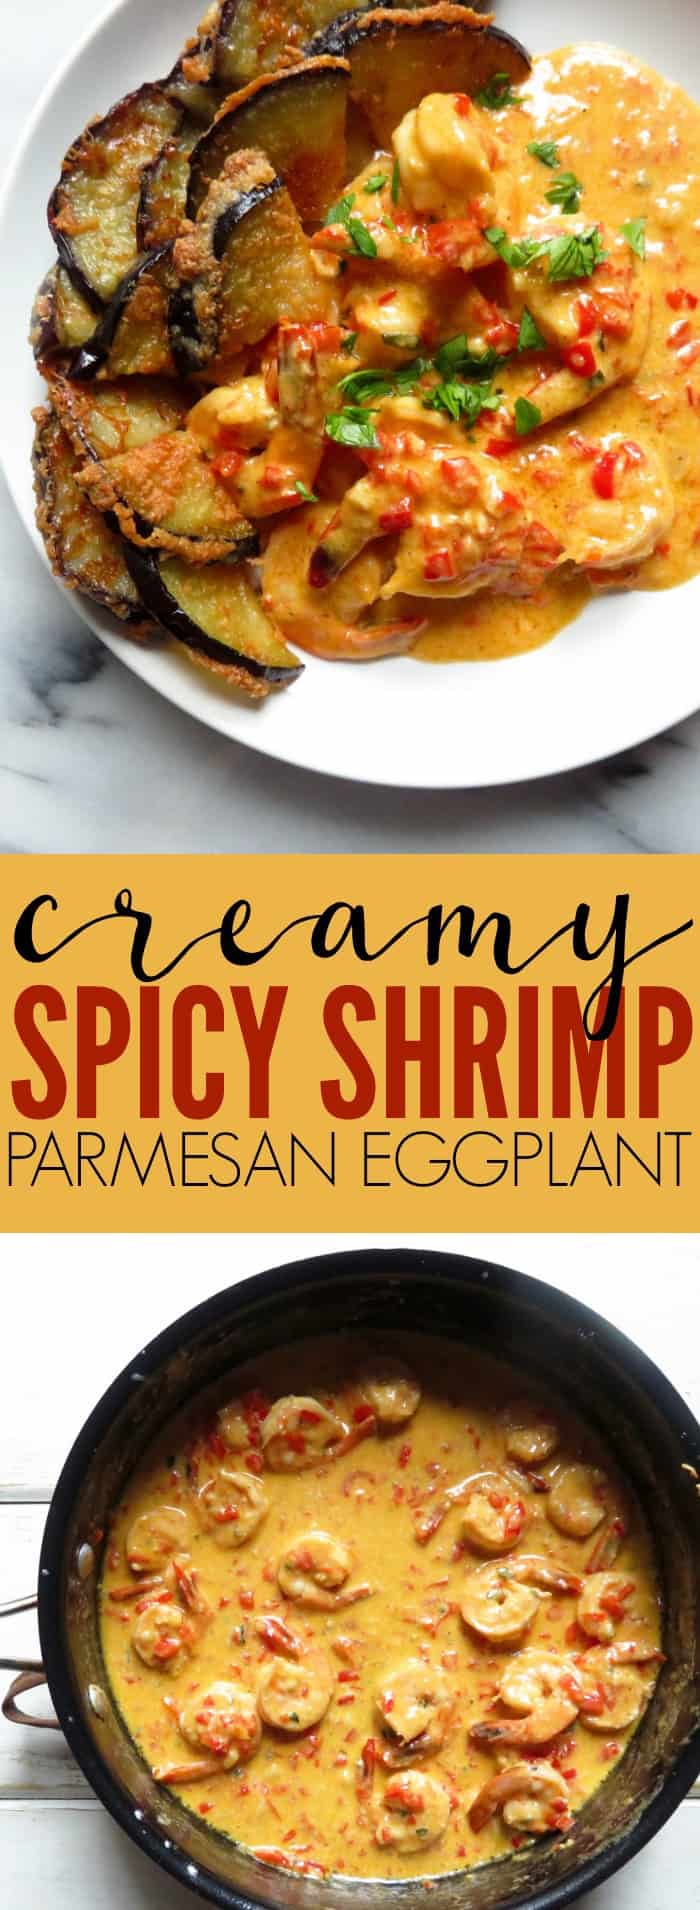 Obsessed with this Creamy Spicy Shrimp + Parmesan Eggplant!! Such a fun and decadent mix of flavors that are unexpectedly delicious! Low carb + gluten free! thetoastedpinenut.com